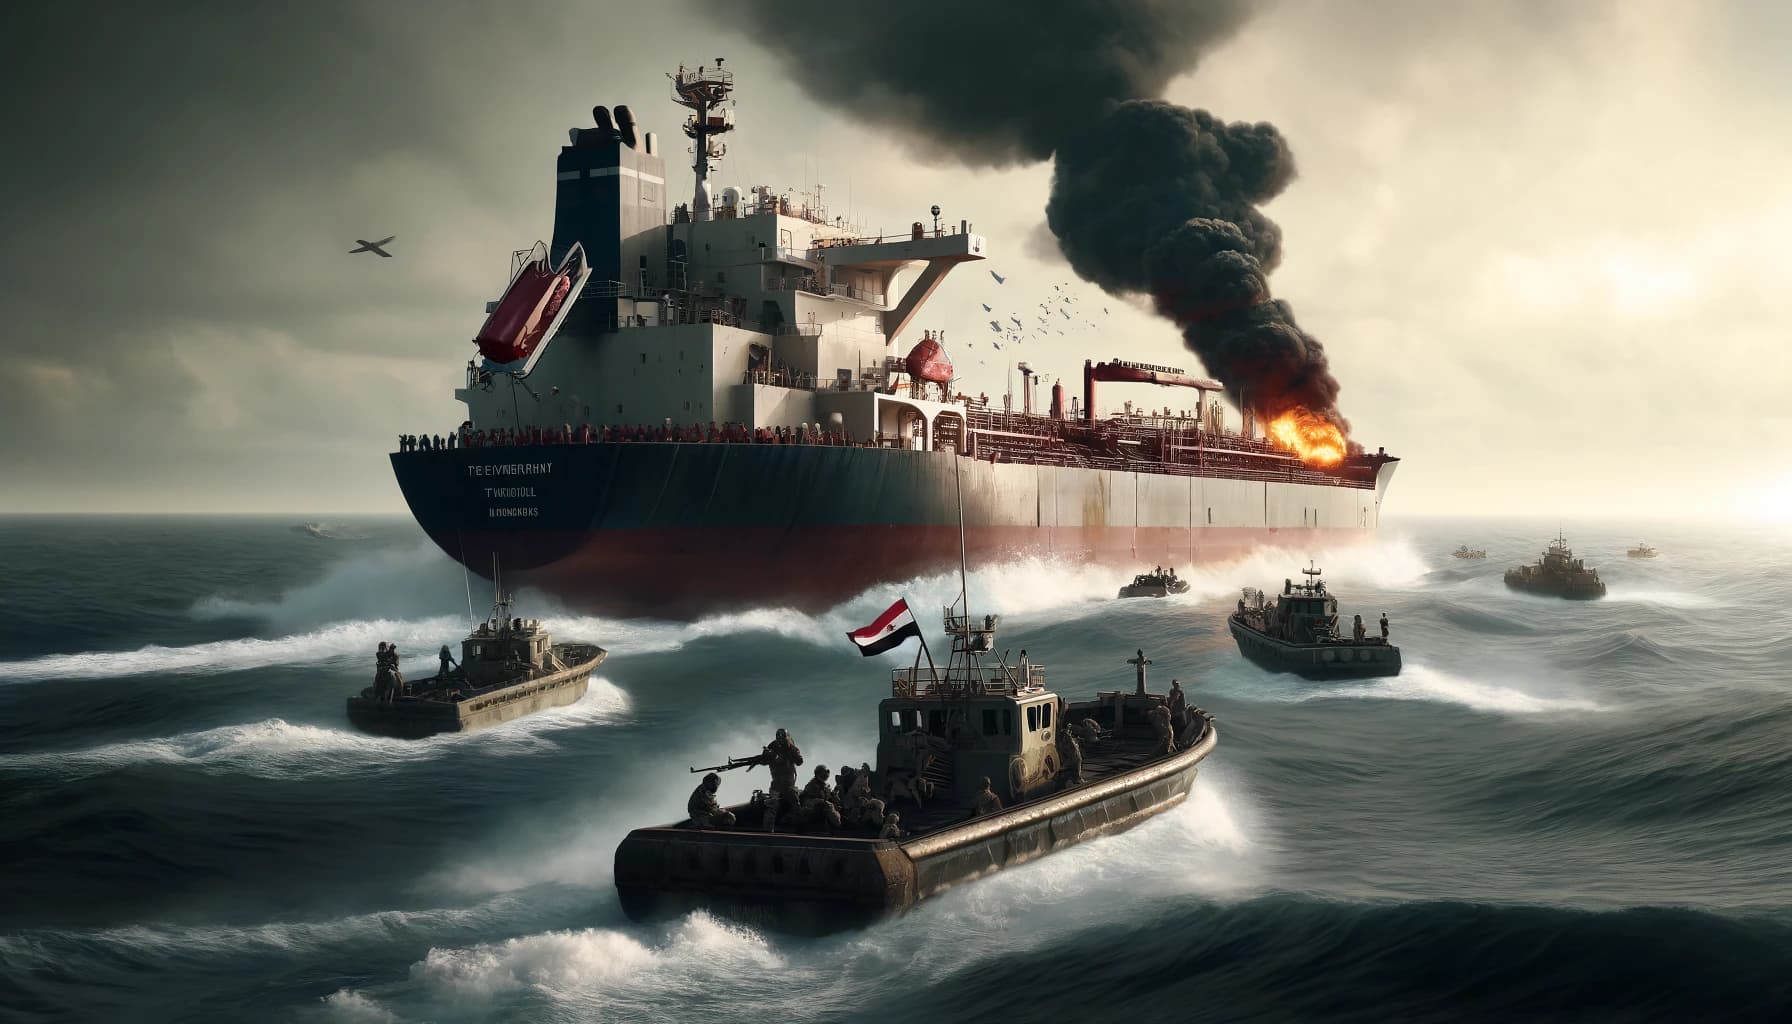 I generated image of Houthis attacking an oil tanker